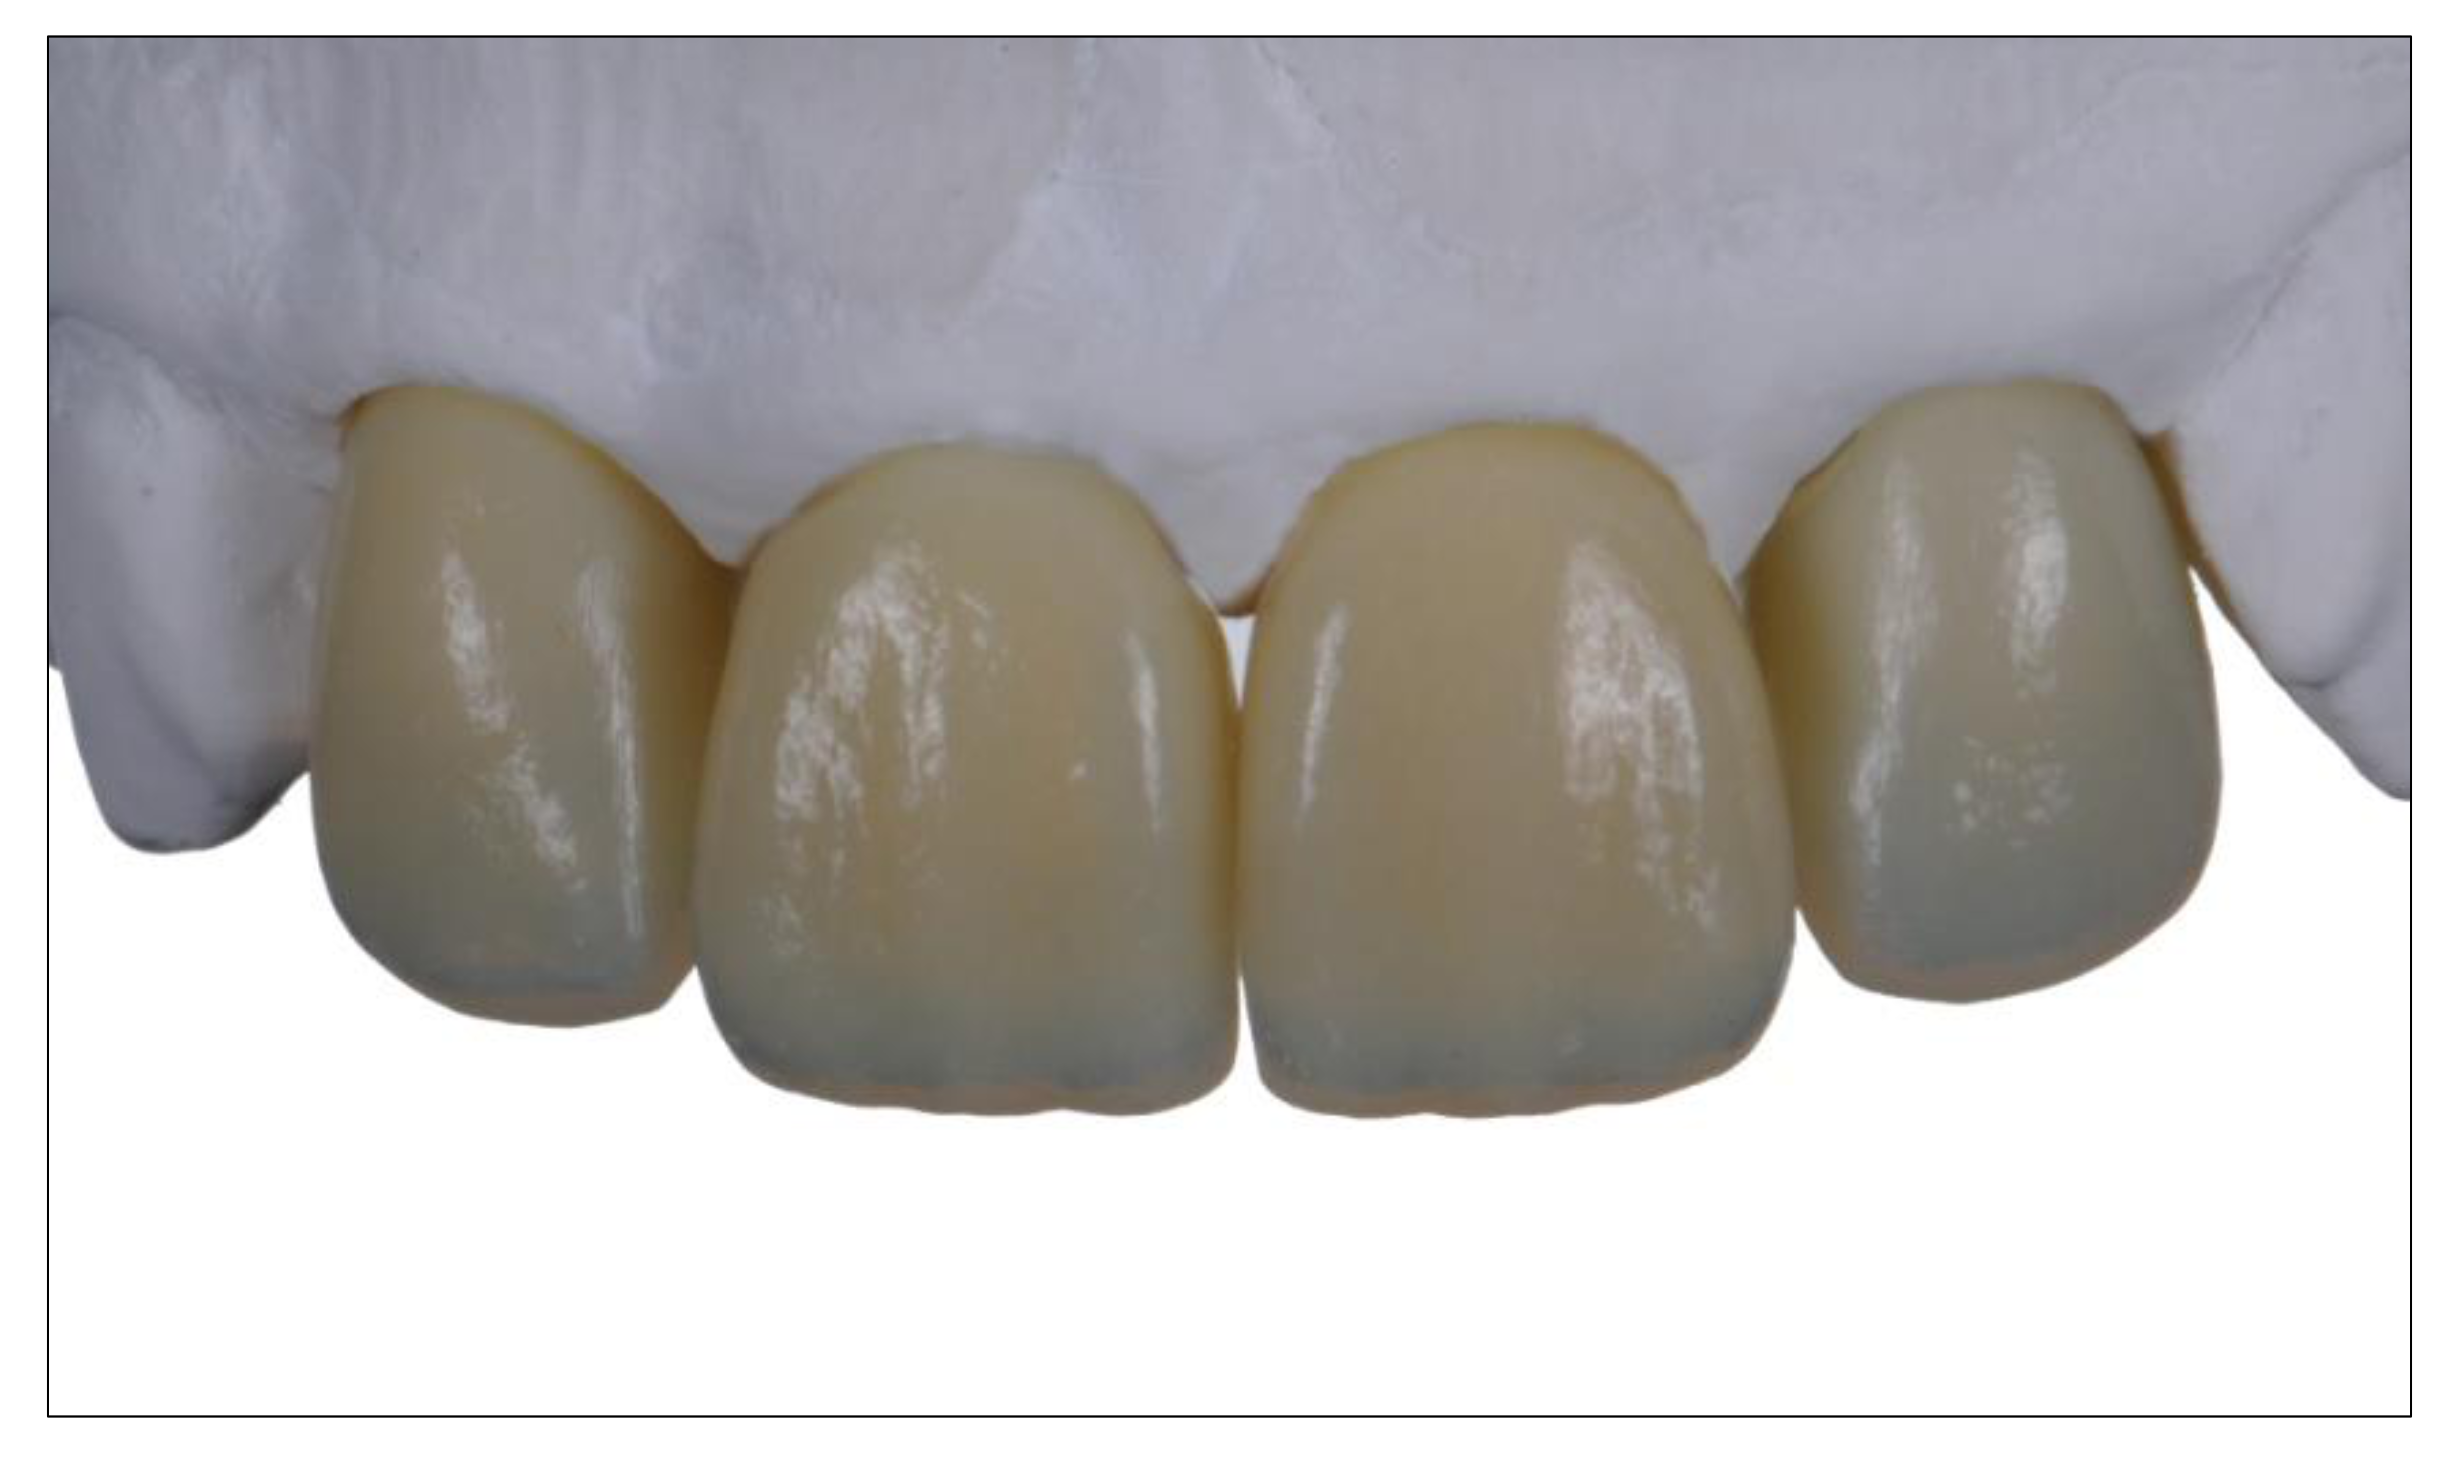 JCM | Free Full-Text | 3D in Digital Prosthetic Dentistry: Overview of Developments in Additive Manufacturing